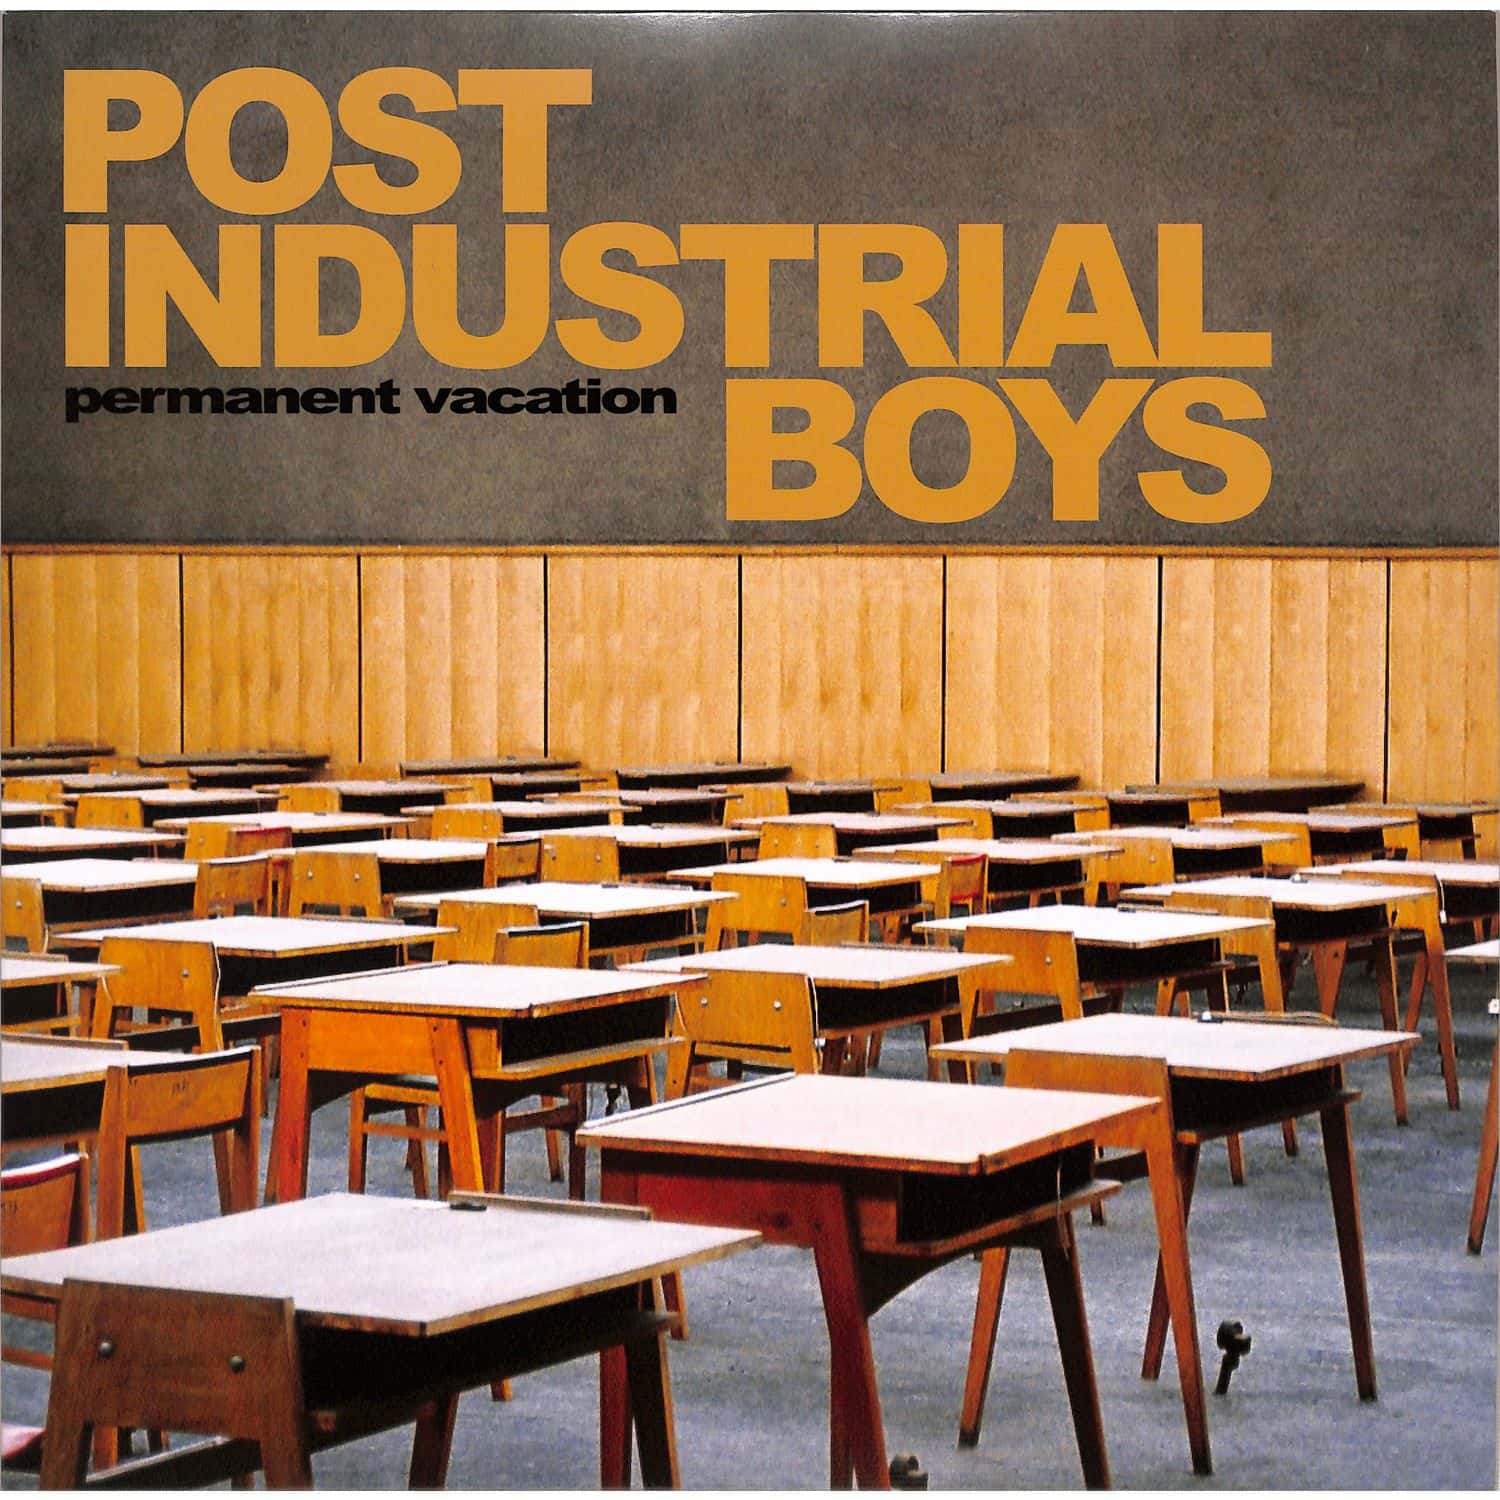 Post Industrial Boys - PERMANENT VACATION